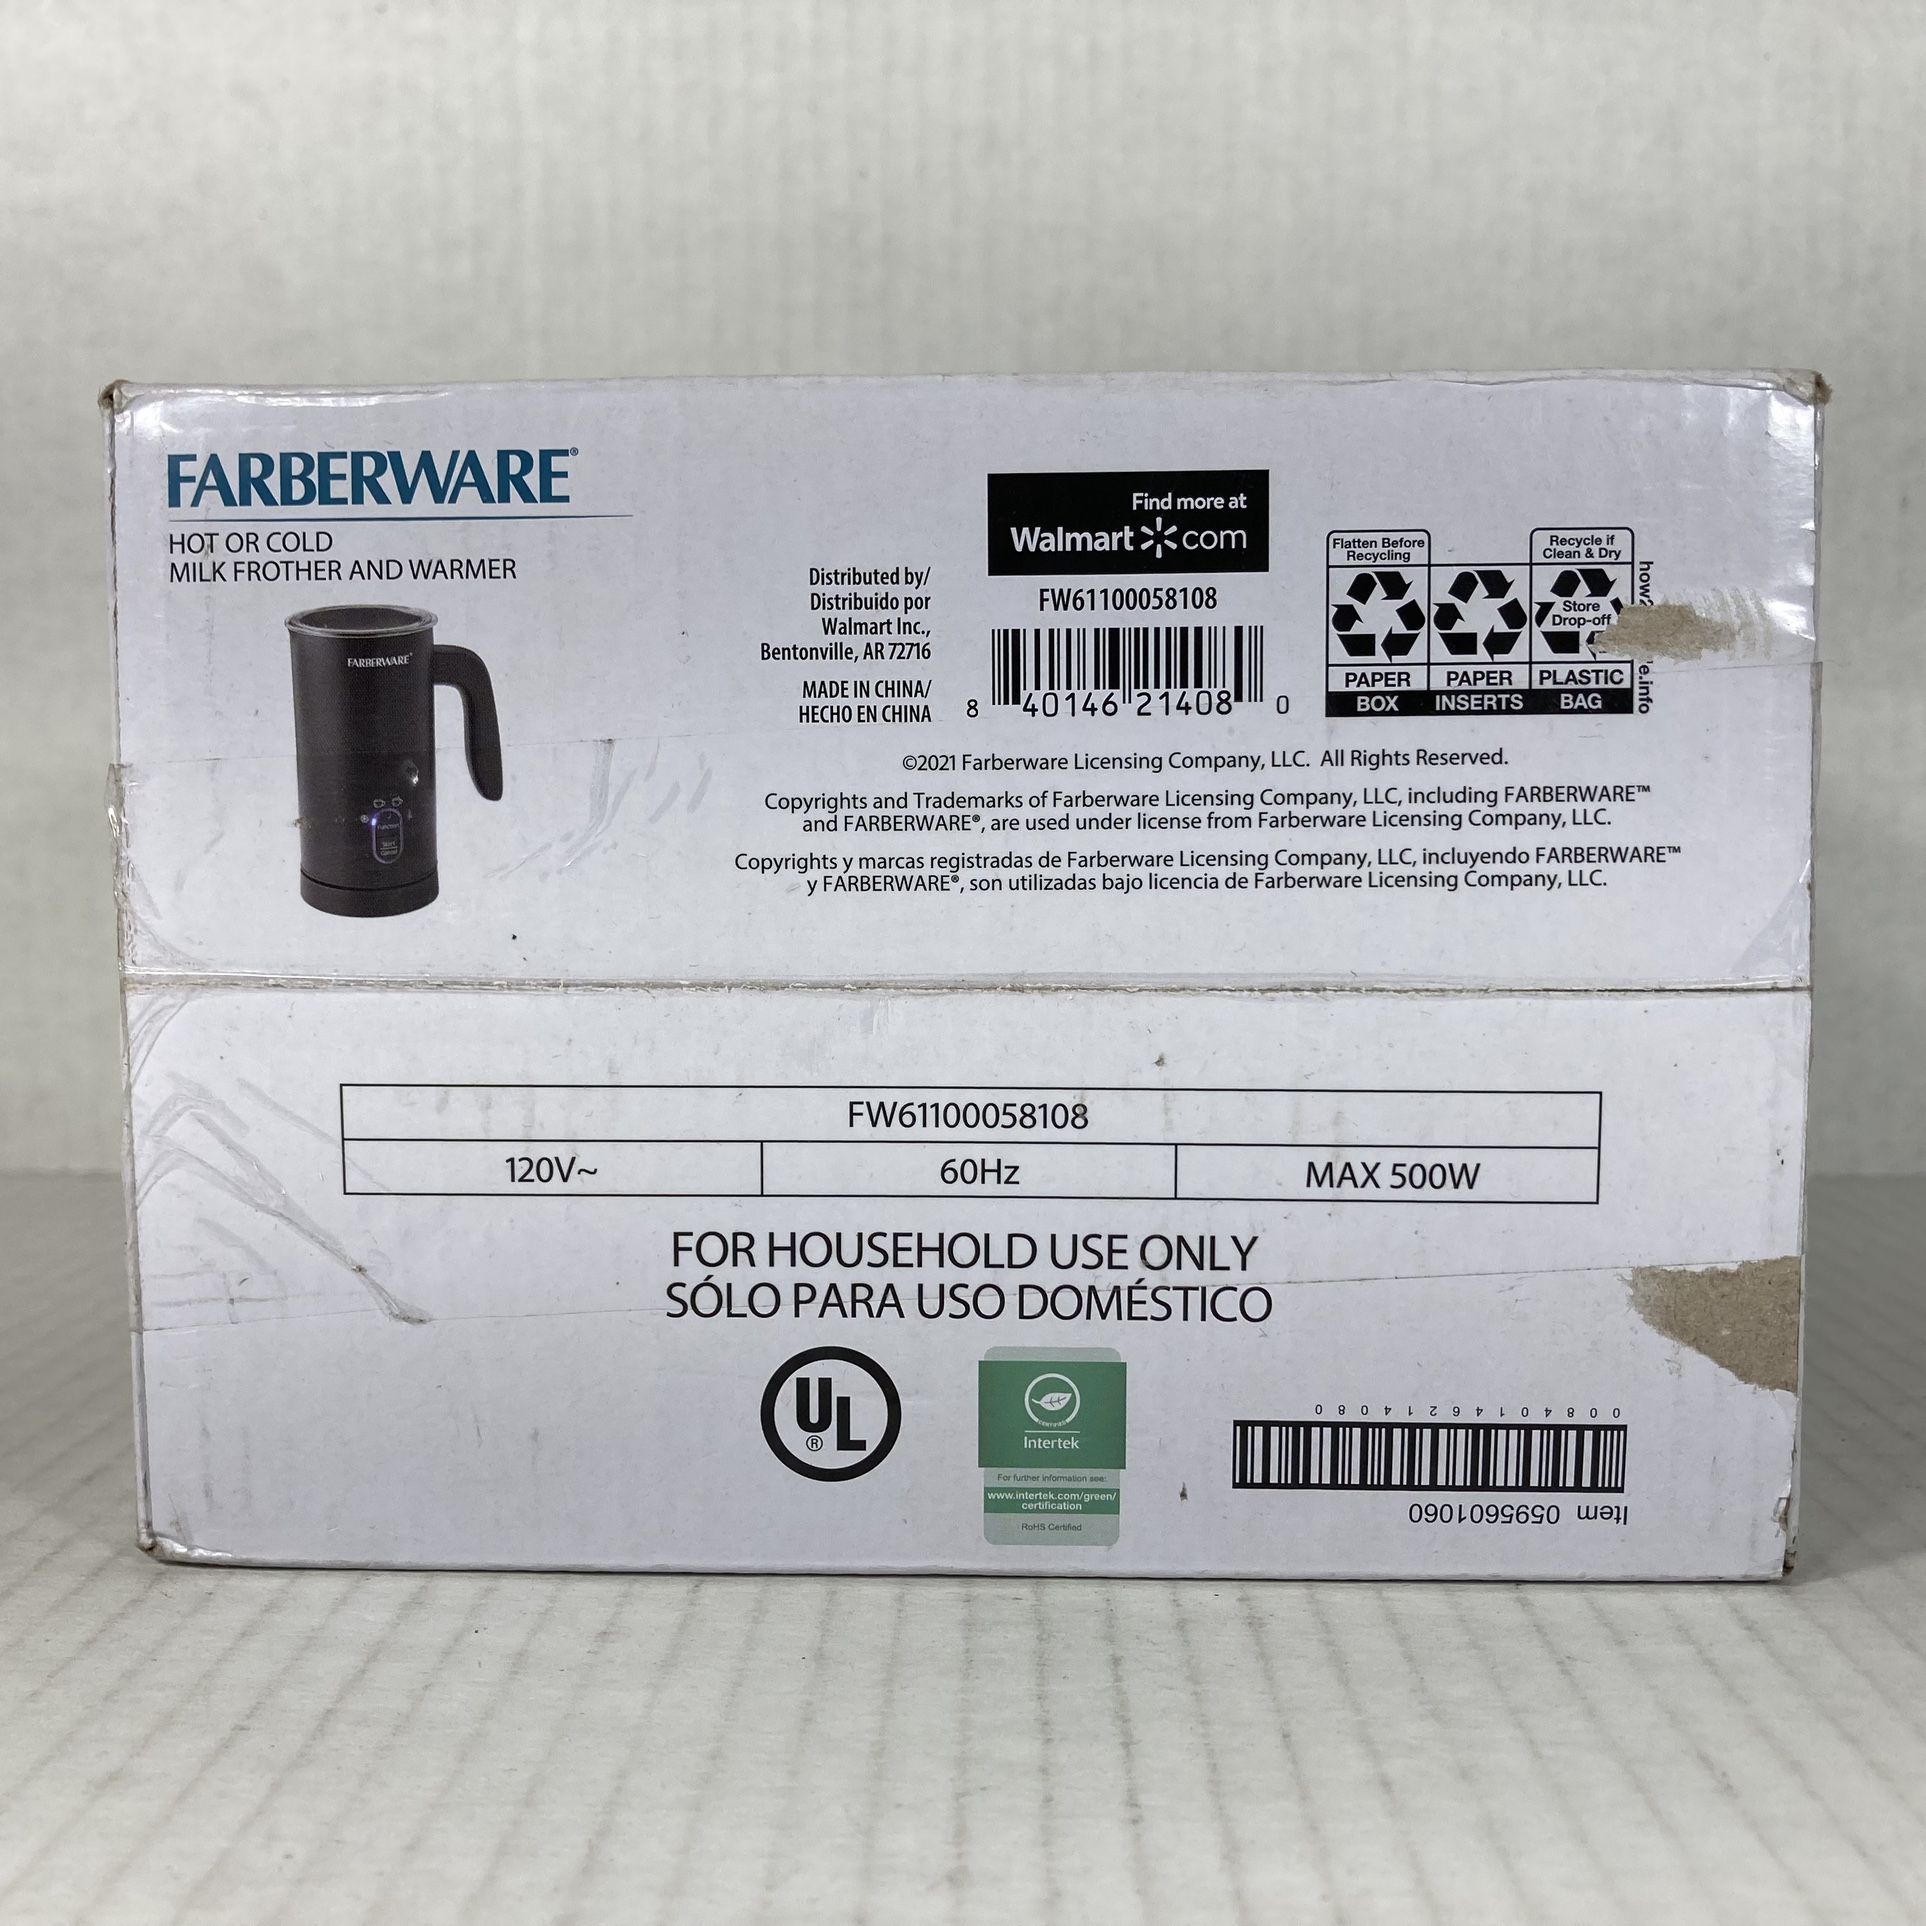 Farberware 4 Functions Hot or Cold Milk Frother & Warmer USED